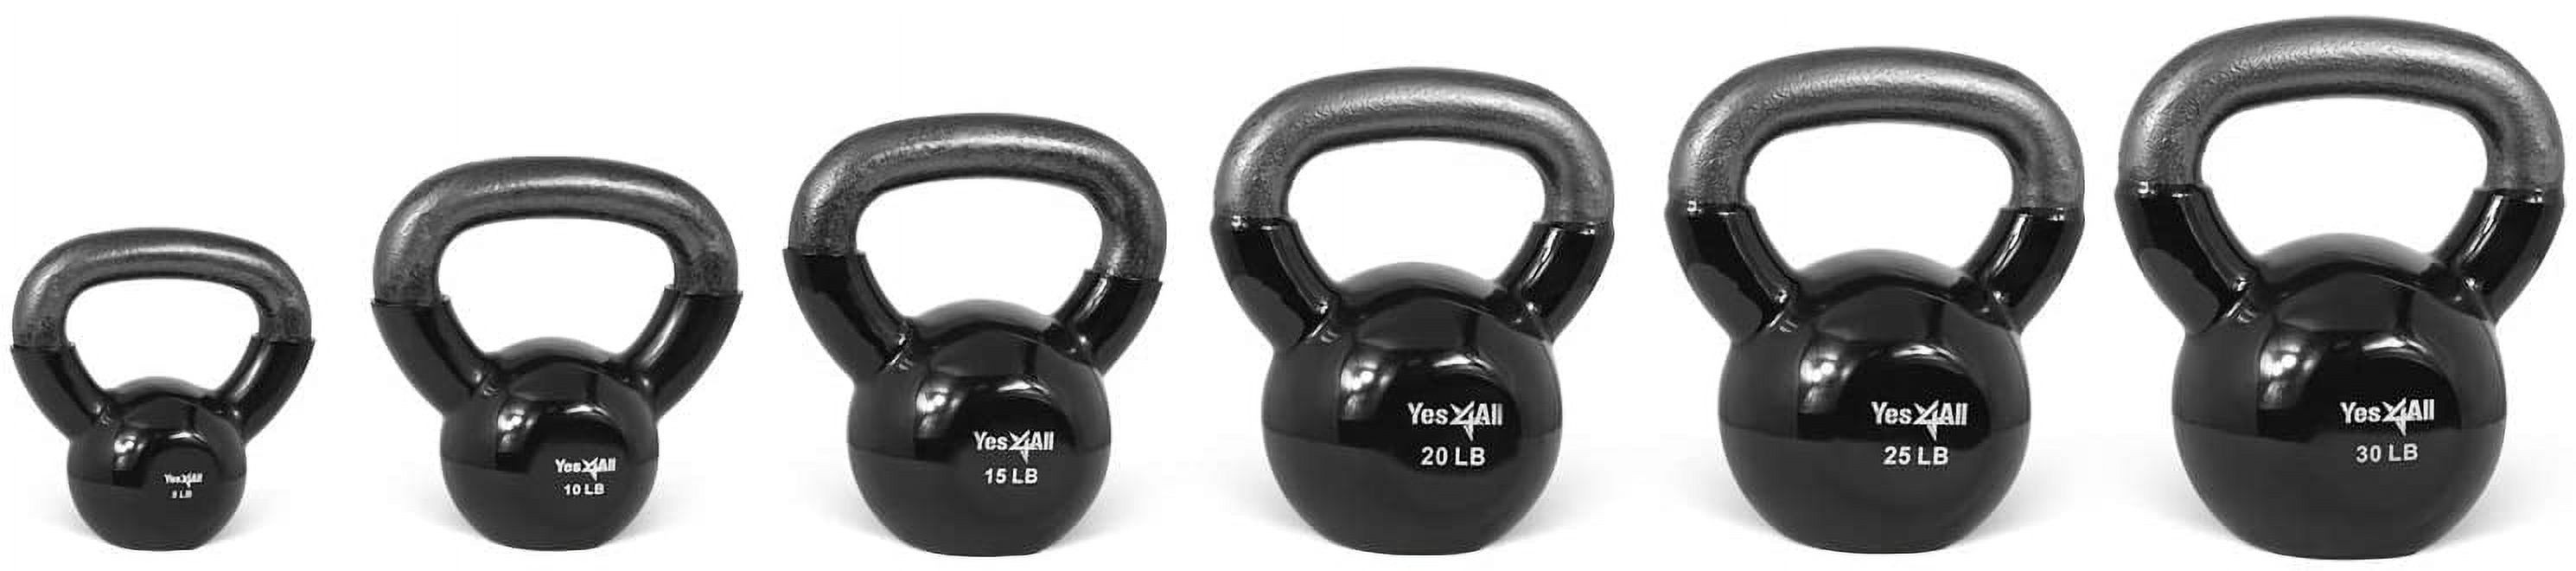 Yes4All 70 lb Vinyl Coated / PVC Kettlebell, Black, Combo / Set, Includes 10-25lb - image 3 of 8